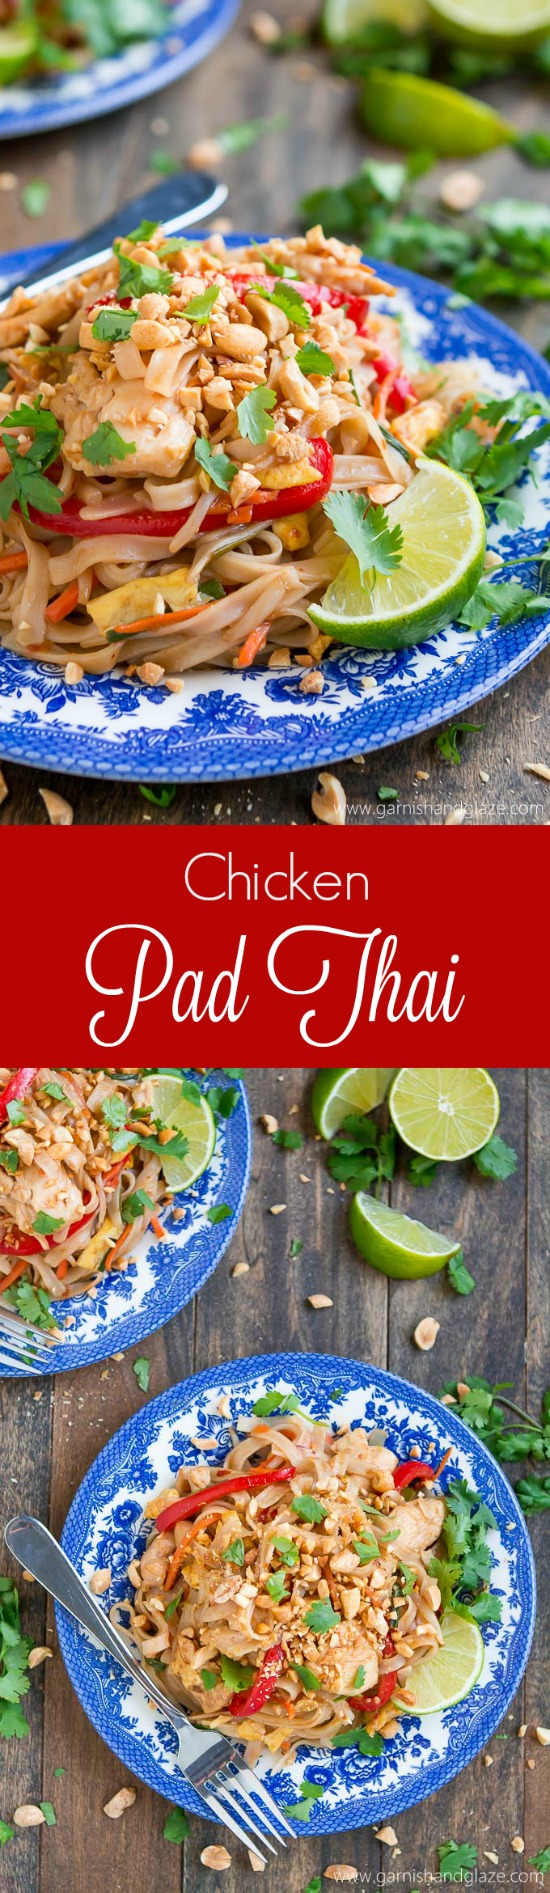  Enjoy Thai food at home with this quick and easy Chicken Pad Thai.